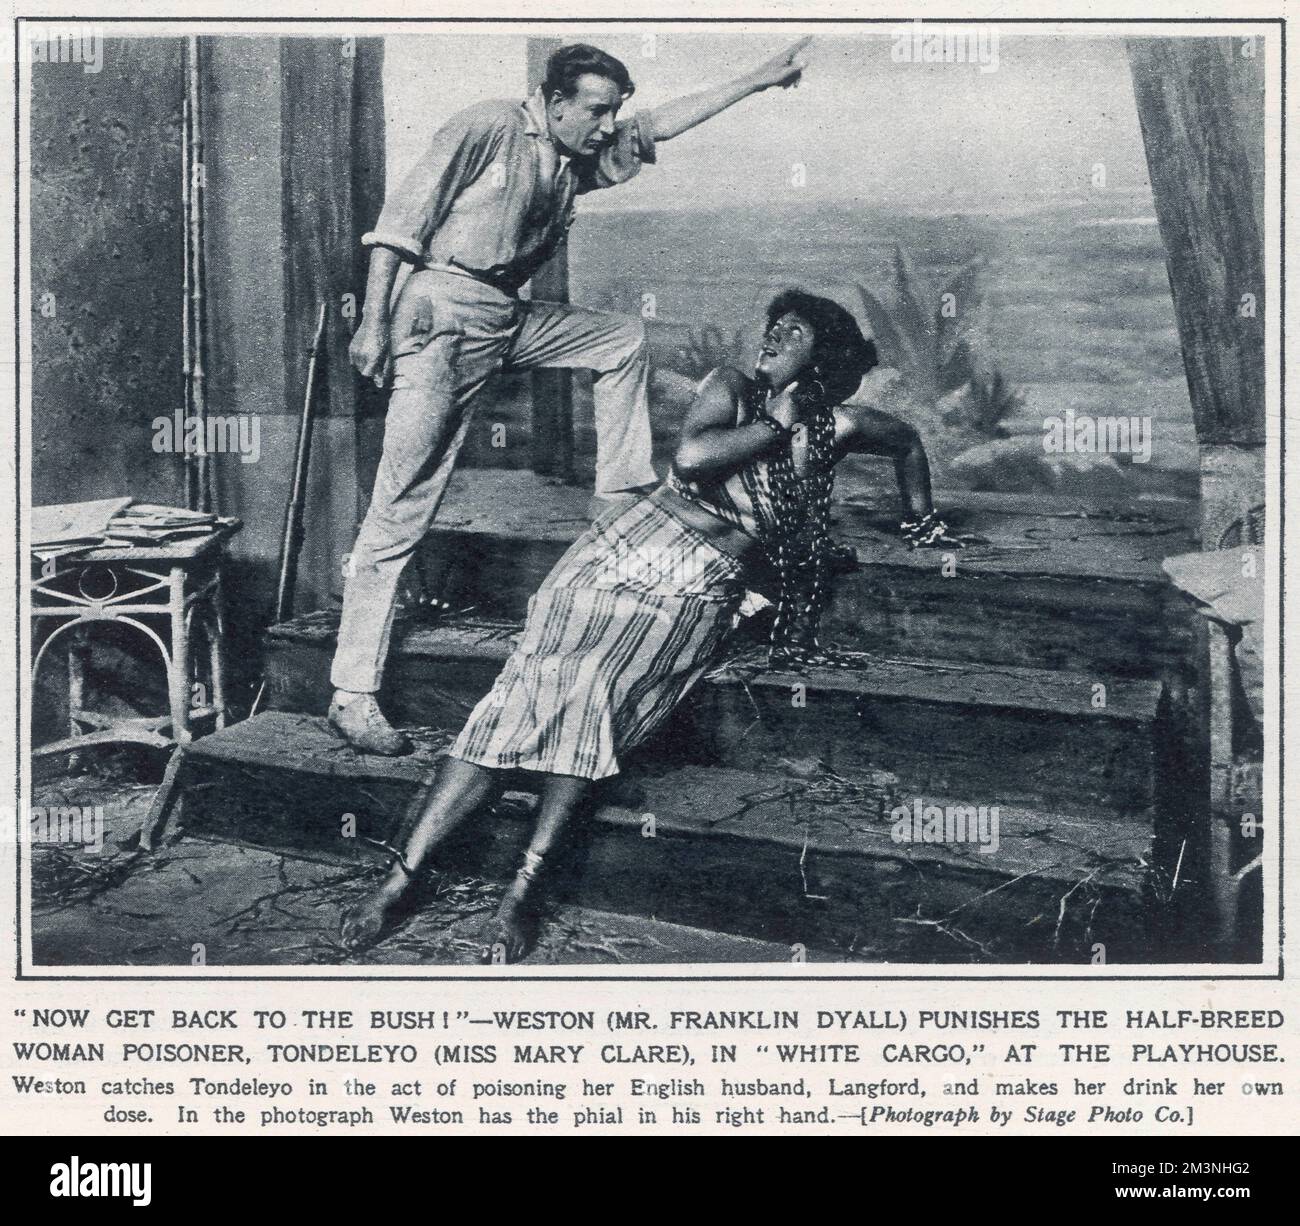 Scene from Leon Gordon's play, White Cargo, which tells the story of how newcomers with ideals arrive in West Africa but become quickly demoralised with life there.  The scene depicts a 'half-breed' woman, Tondeleyo, played by Miss Mary Clare being punished by her English husband, Weston (played by Franklin Dyall) for trying to poison him.     Date: 1924 Stock Photo